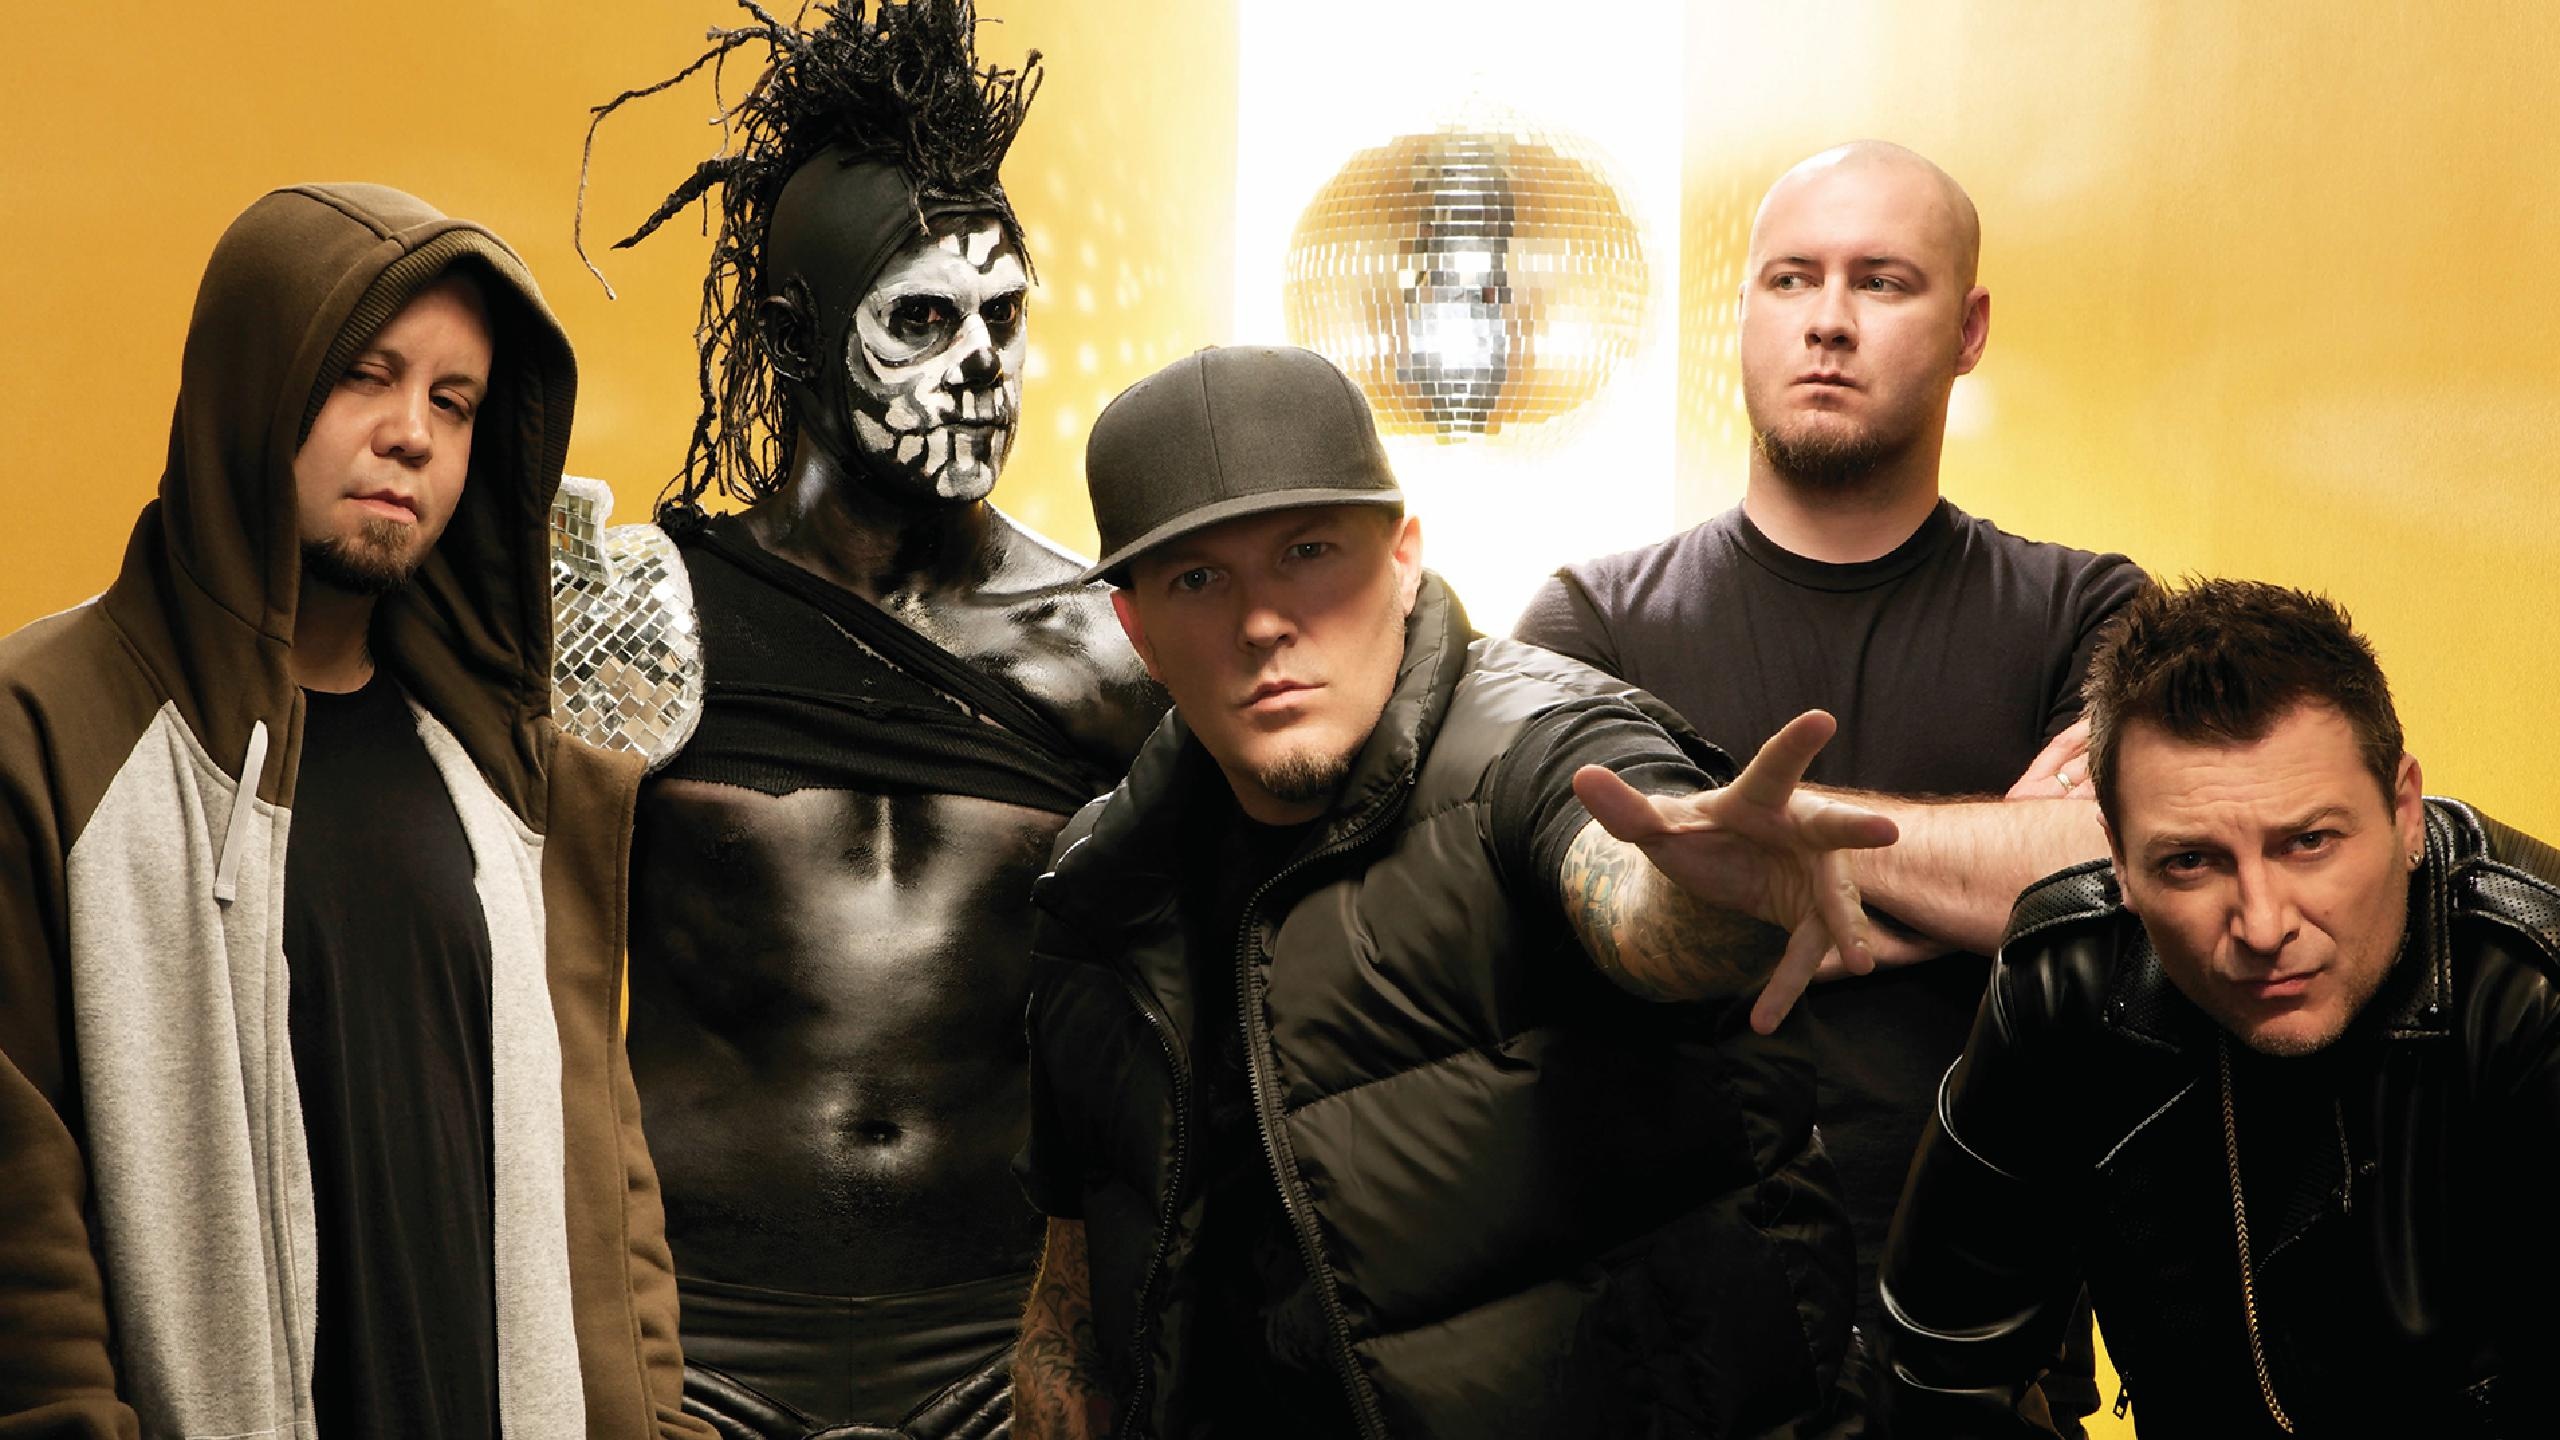 Limp Bizkit: Music marked by Durst's angry vocal delivery, “Behind Blue Eyes”. 2560x1440 HD Background.